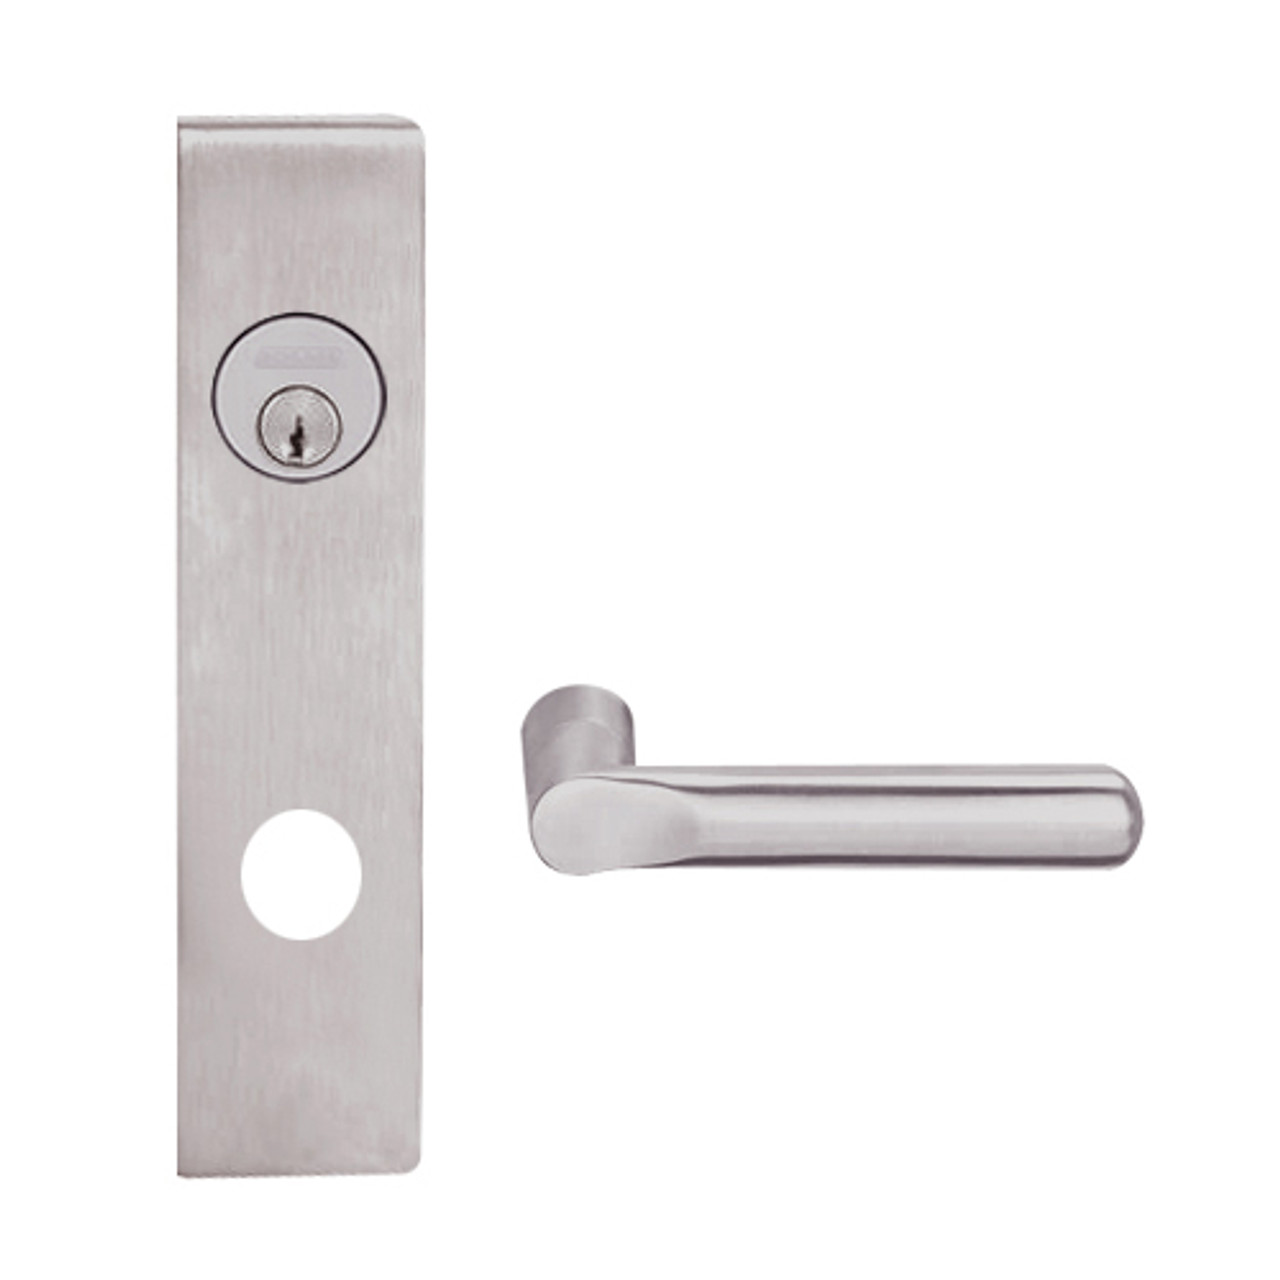 L9453L-18L-630 Schlage L Series Less Cylinder Entrance with Deadbolt Commercial Mortise Lock with 18 Cast Lever Design in Satin Stainless Steel